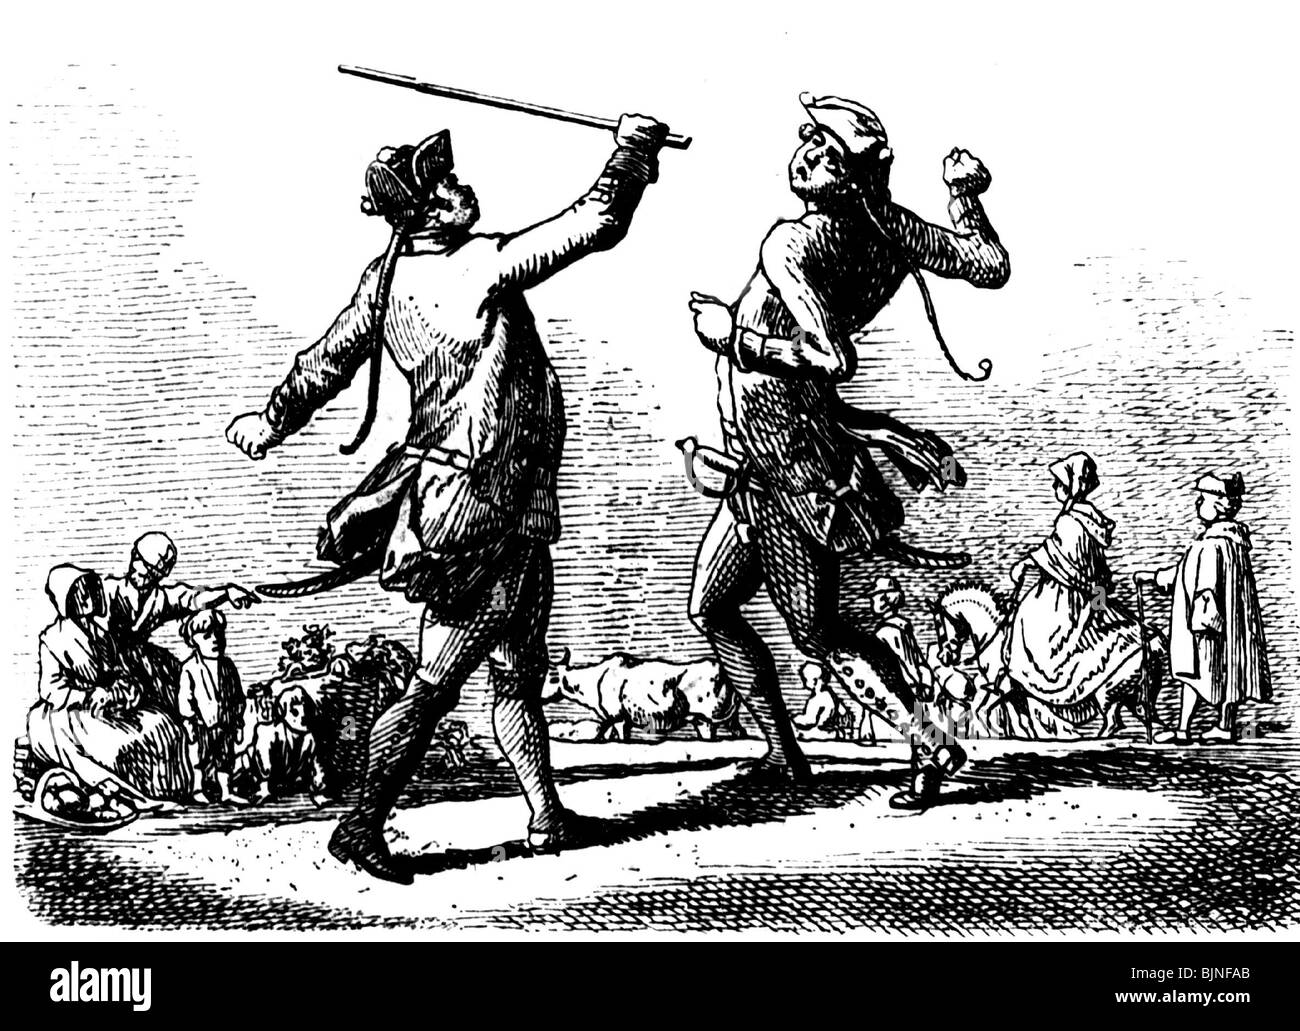 military, Germany, 18th century, Prussia, drill in the Prussian army at the time of King Frederick William I (1713 - 1740), copper engraving by Daniel Chodowiecki (1726 - 1801), historic, historical, NCO, floggings, penalisation, caning, beating, corporal punishment, soldier, soldiers, stick, hitting, people, Stock Photo